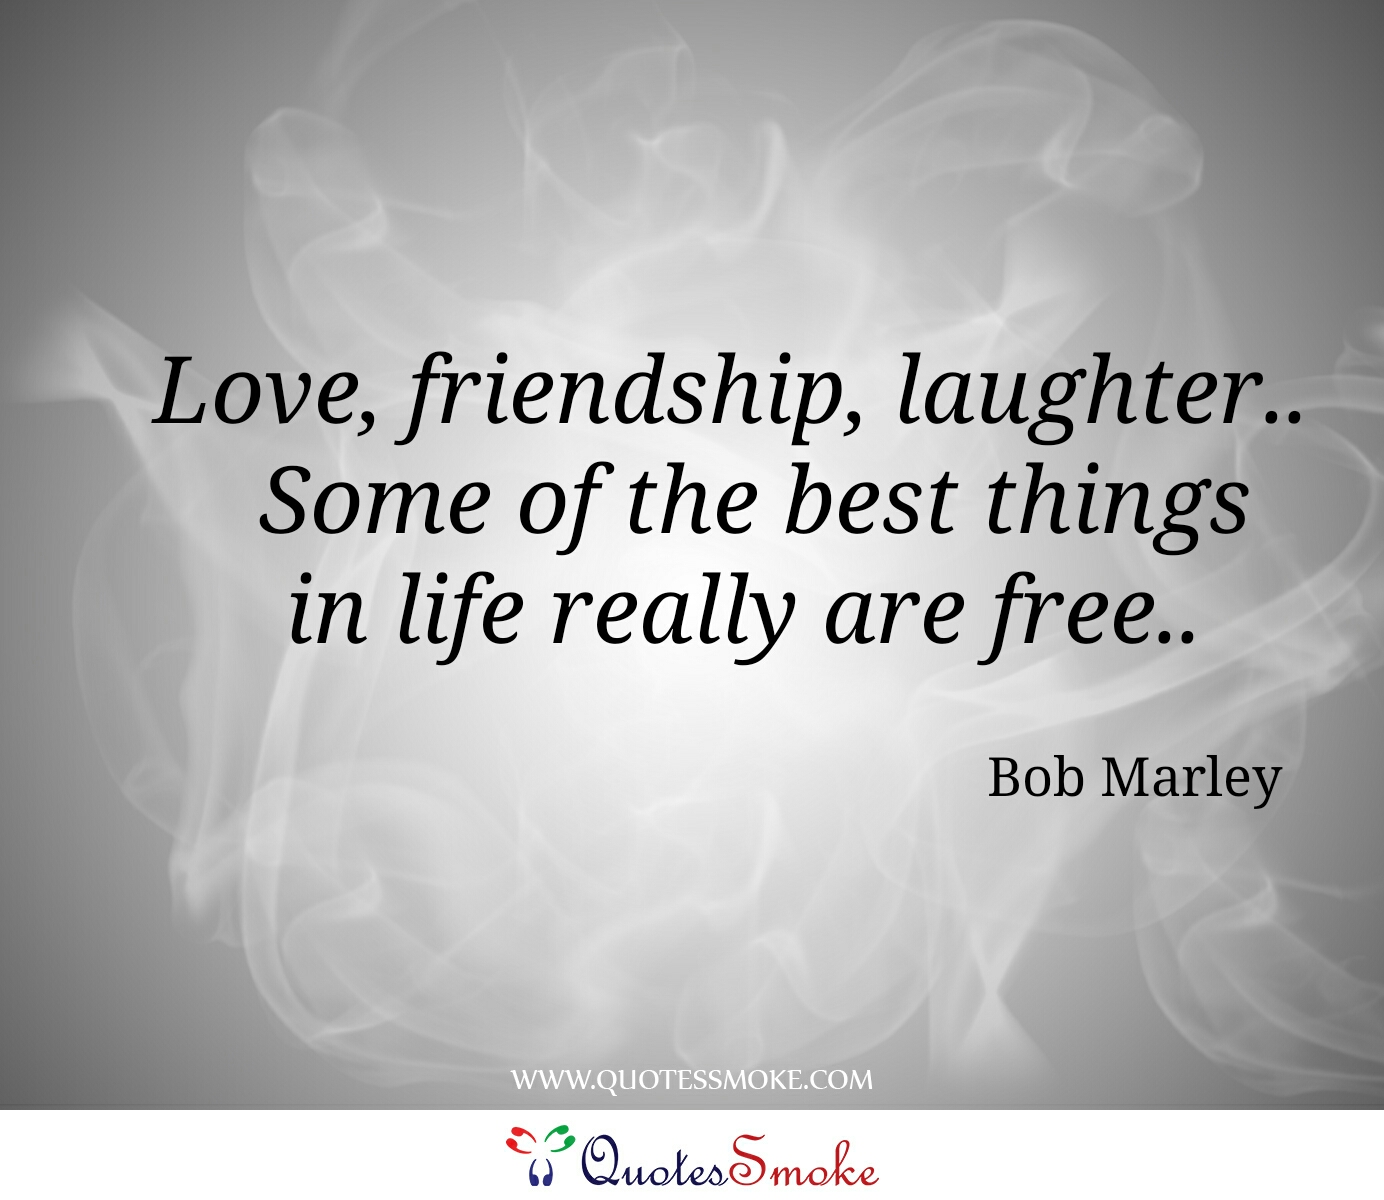 109 Bob Marley Quotes that will Uplift you Thinking